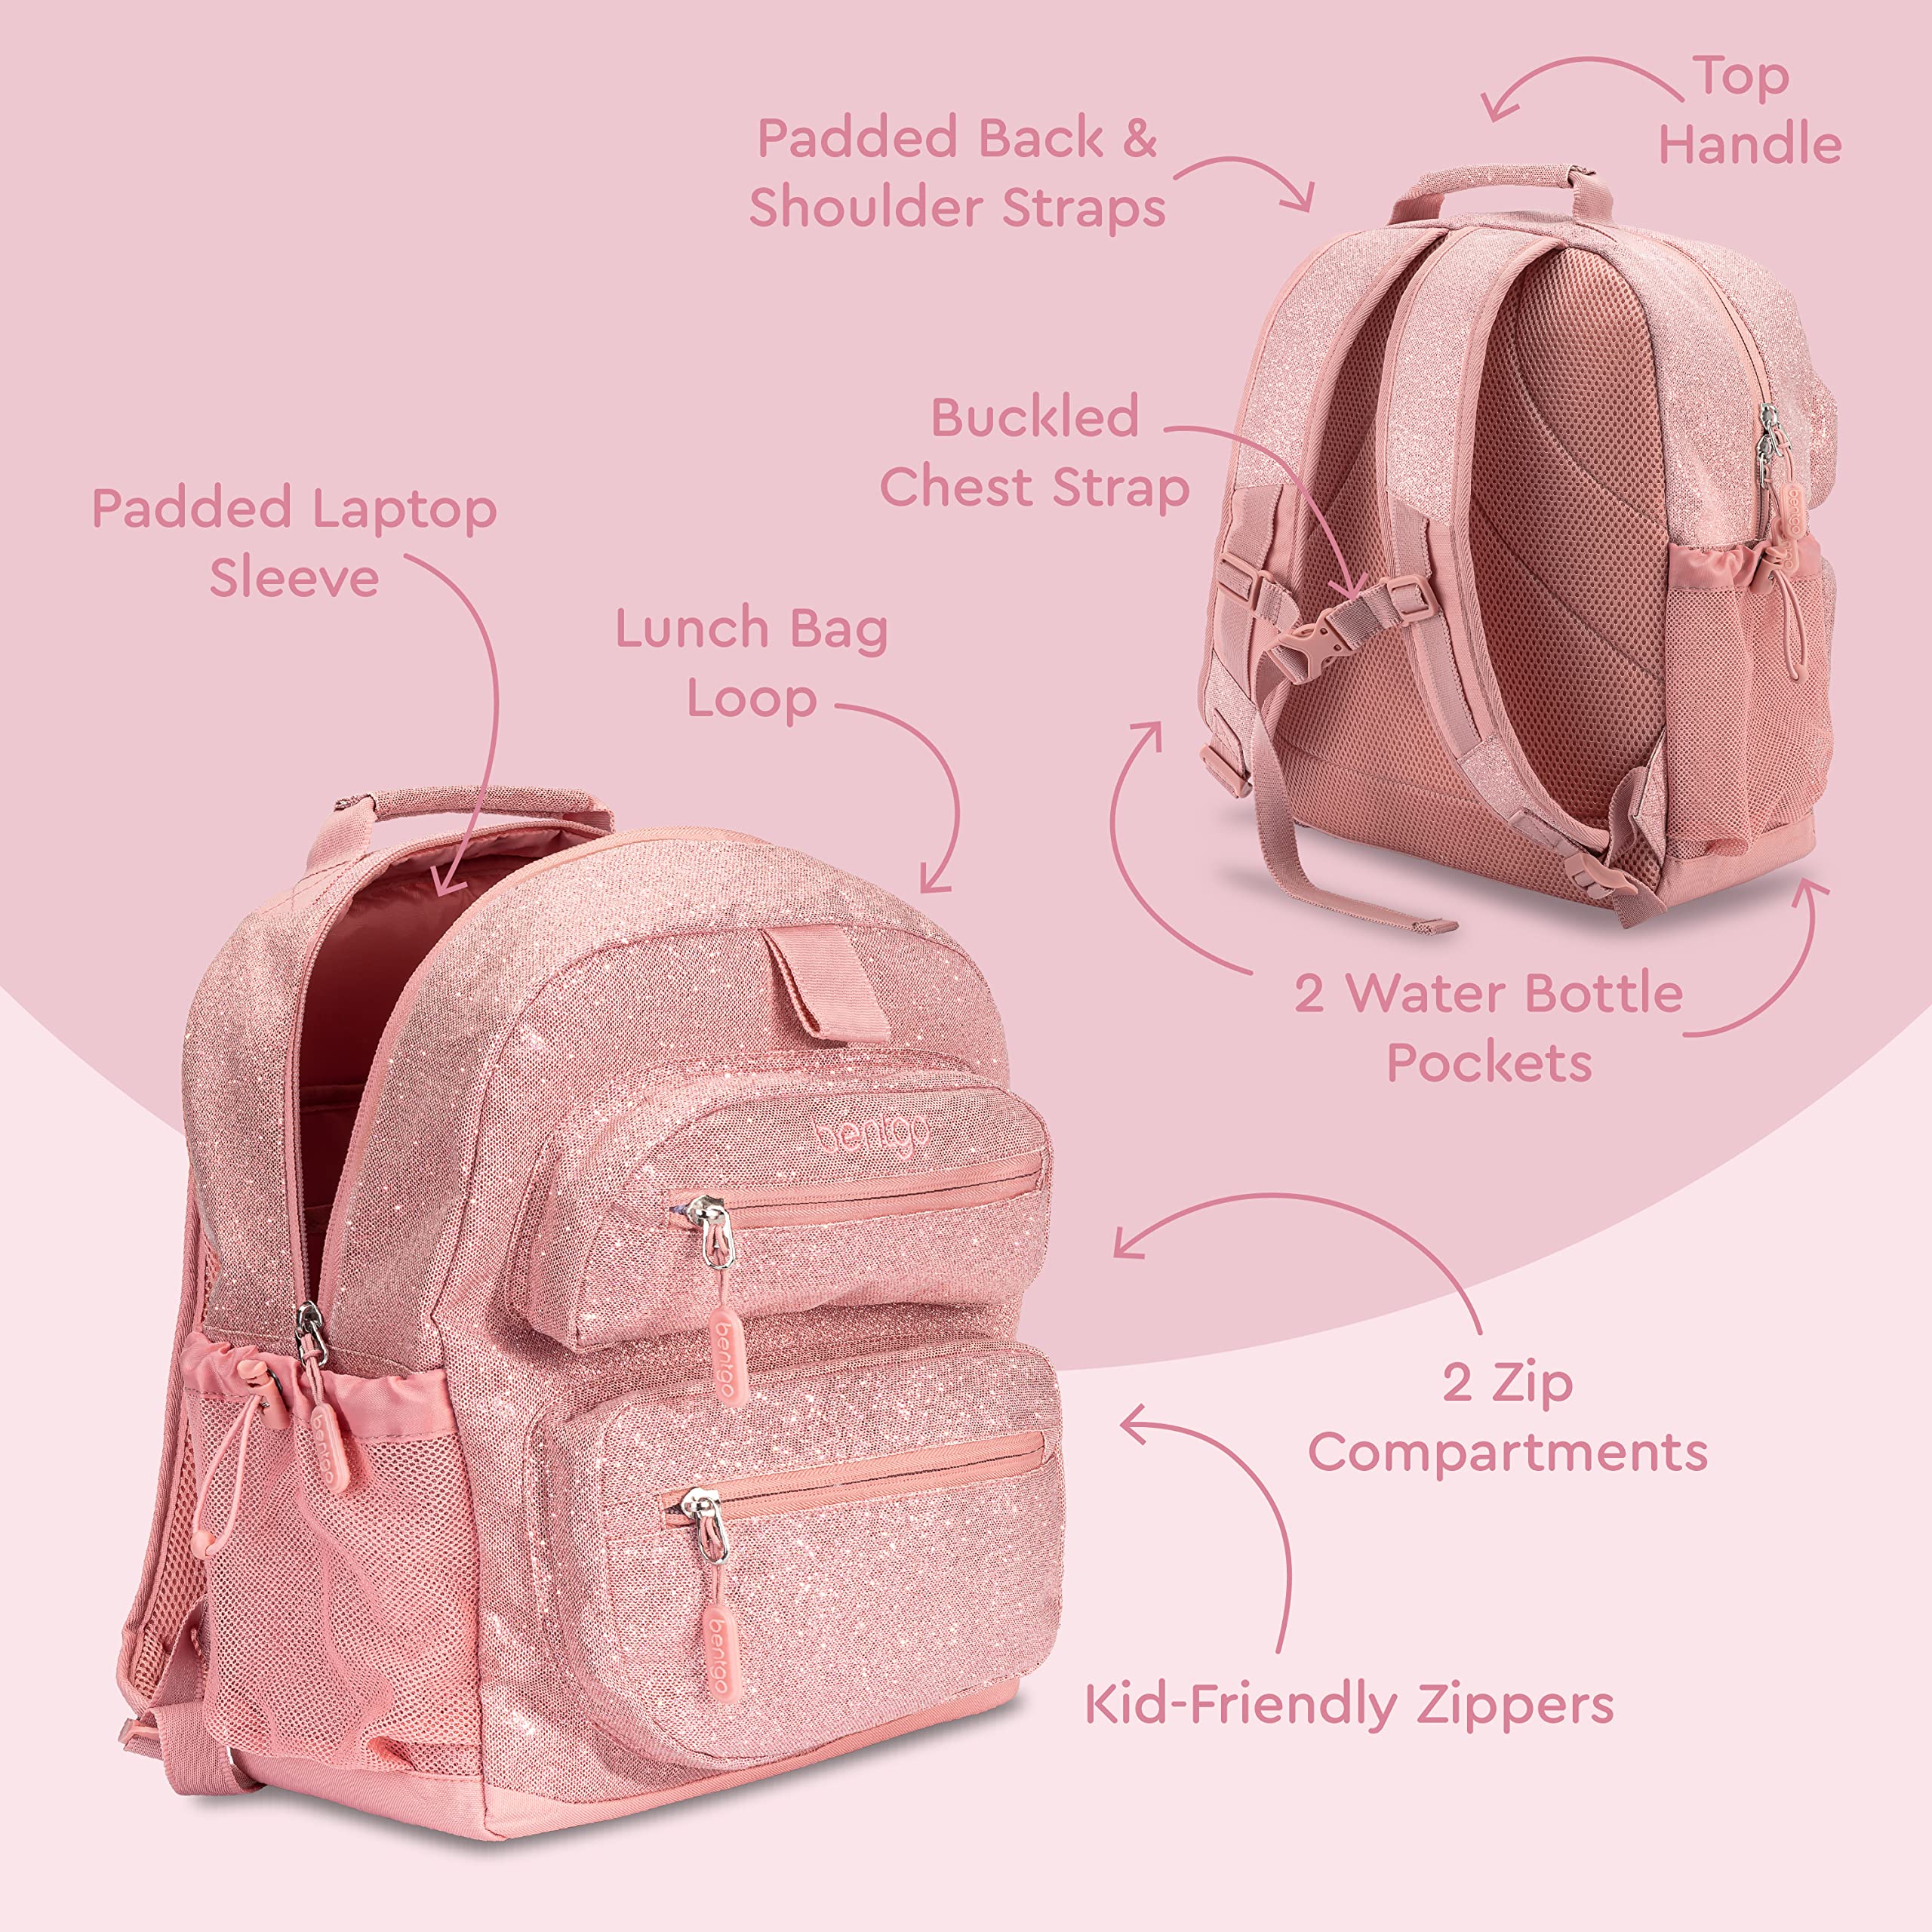 Bentgo® Kids Backpack - Glitter Designed Lightweight 14” Backpack for School, Travel & Daycare - Roomy Interior, Durable & Water-Resistant Fabric & Loop for Lunch Bag (Glitter Edition - Petal Pink)